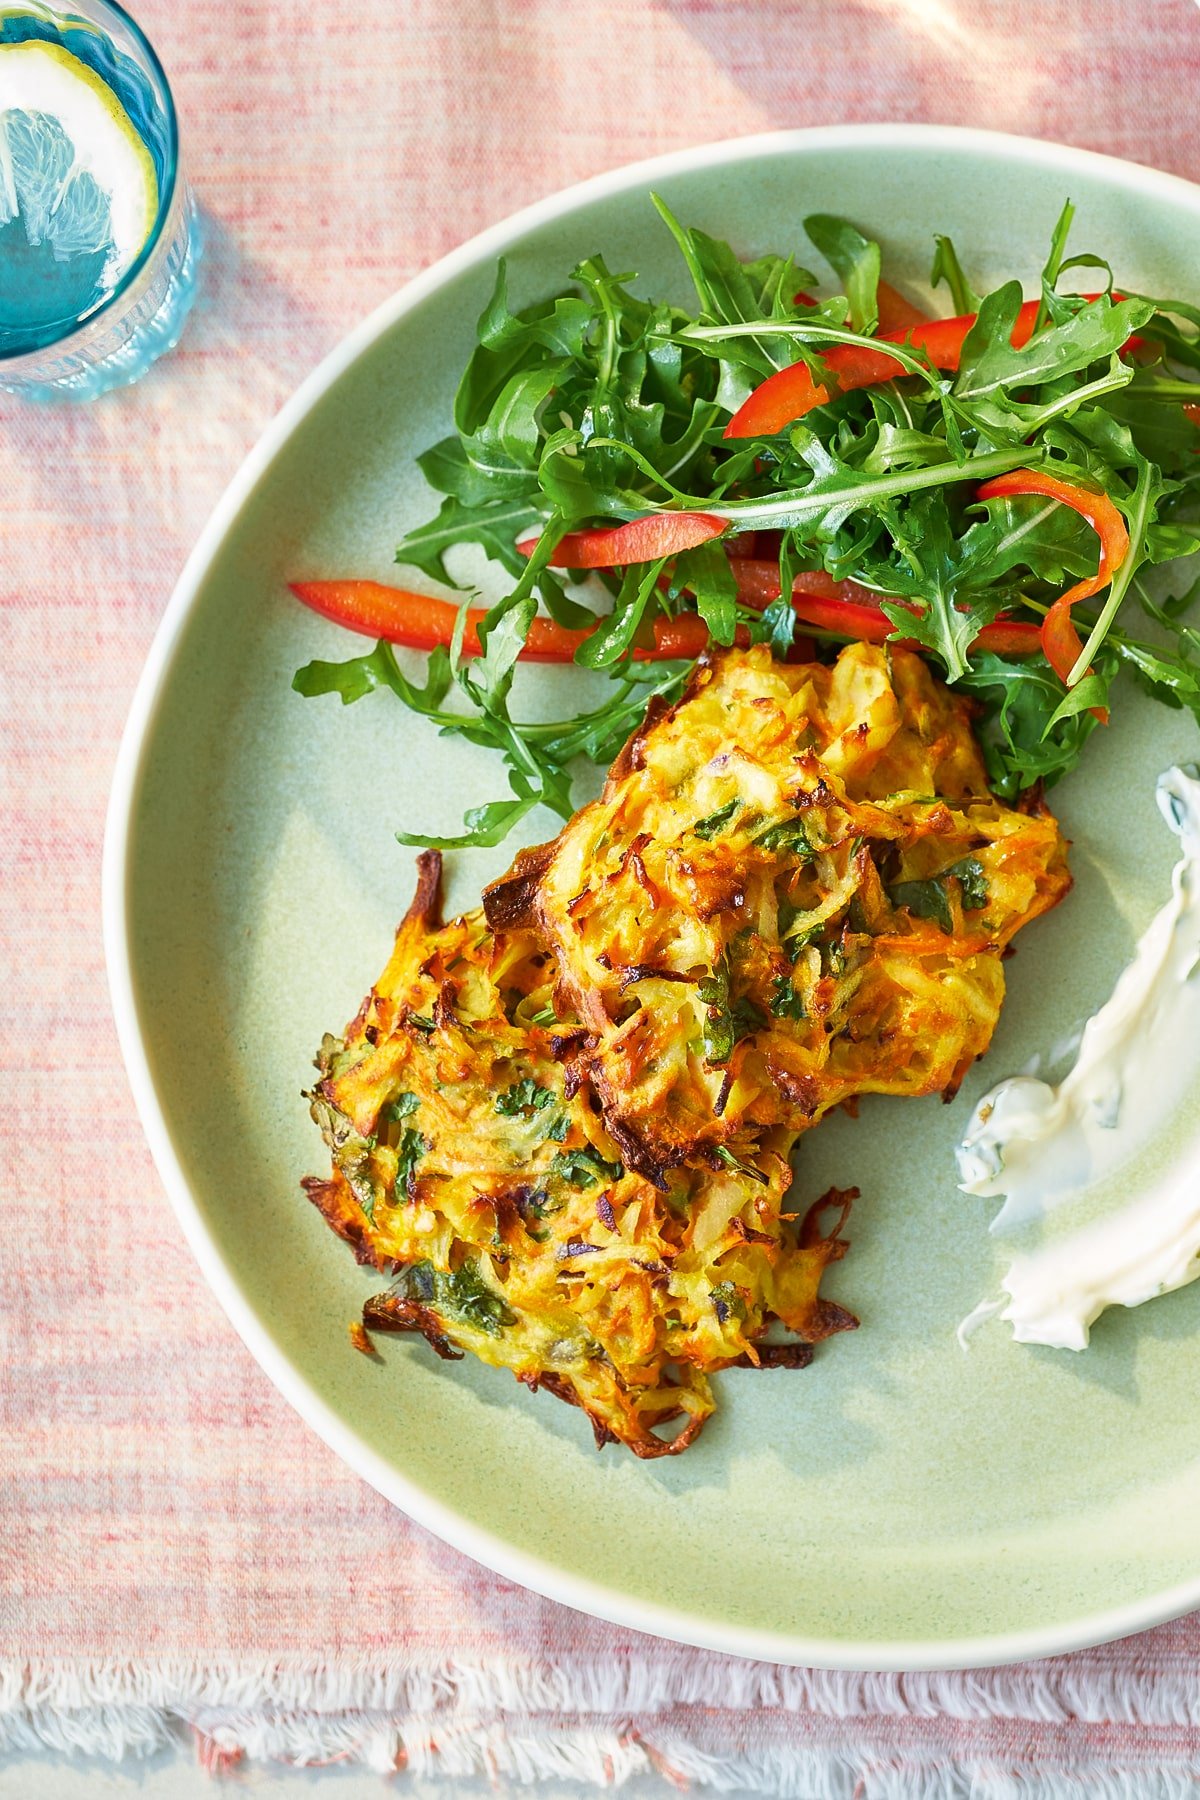 Two carrot patties on a green plate with a rocket and pepper salad.